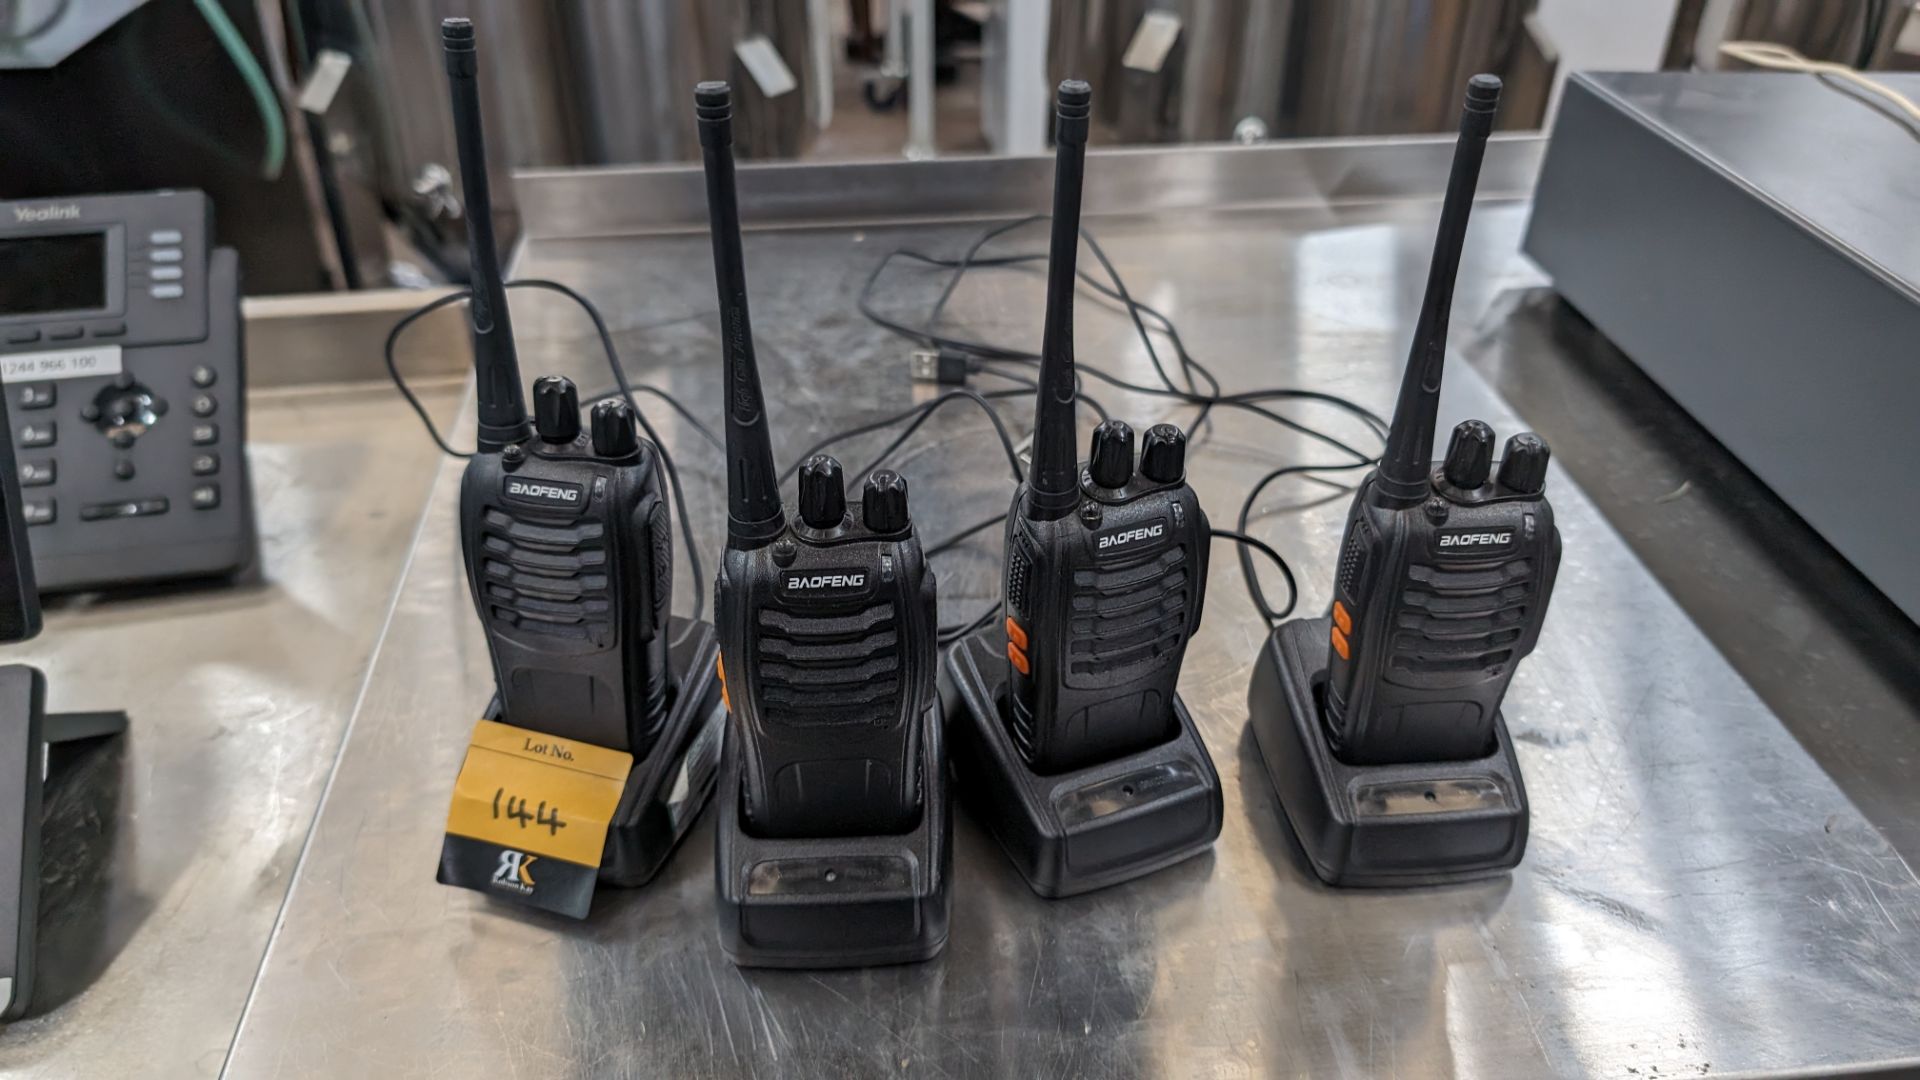 4 off Baofeng walkie-talkies each with their own charging base - Image 2 of 7